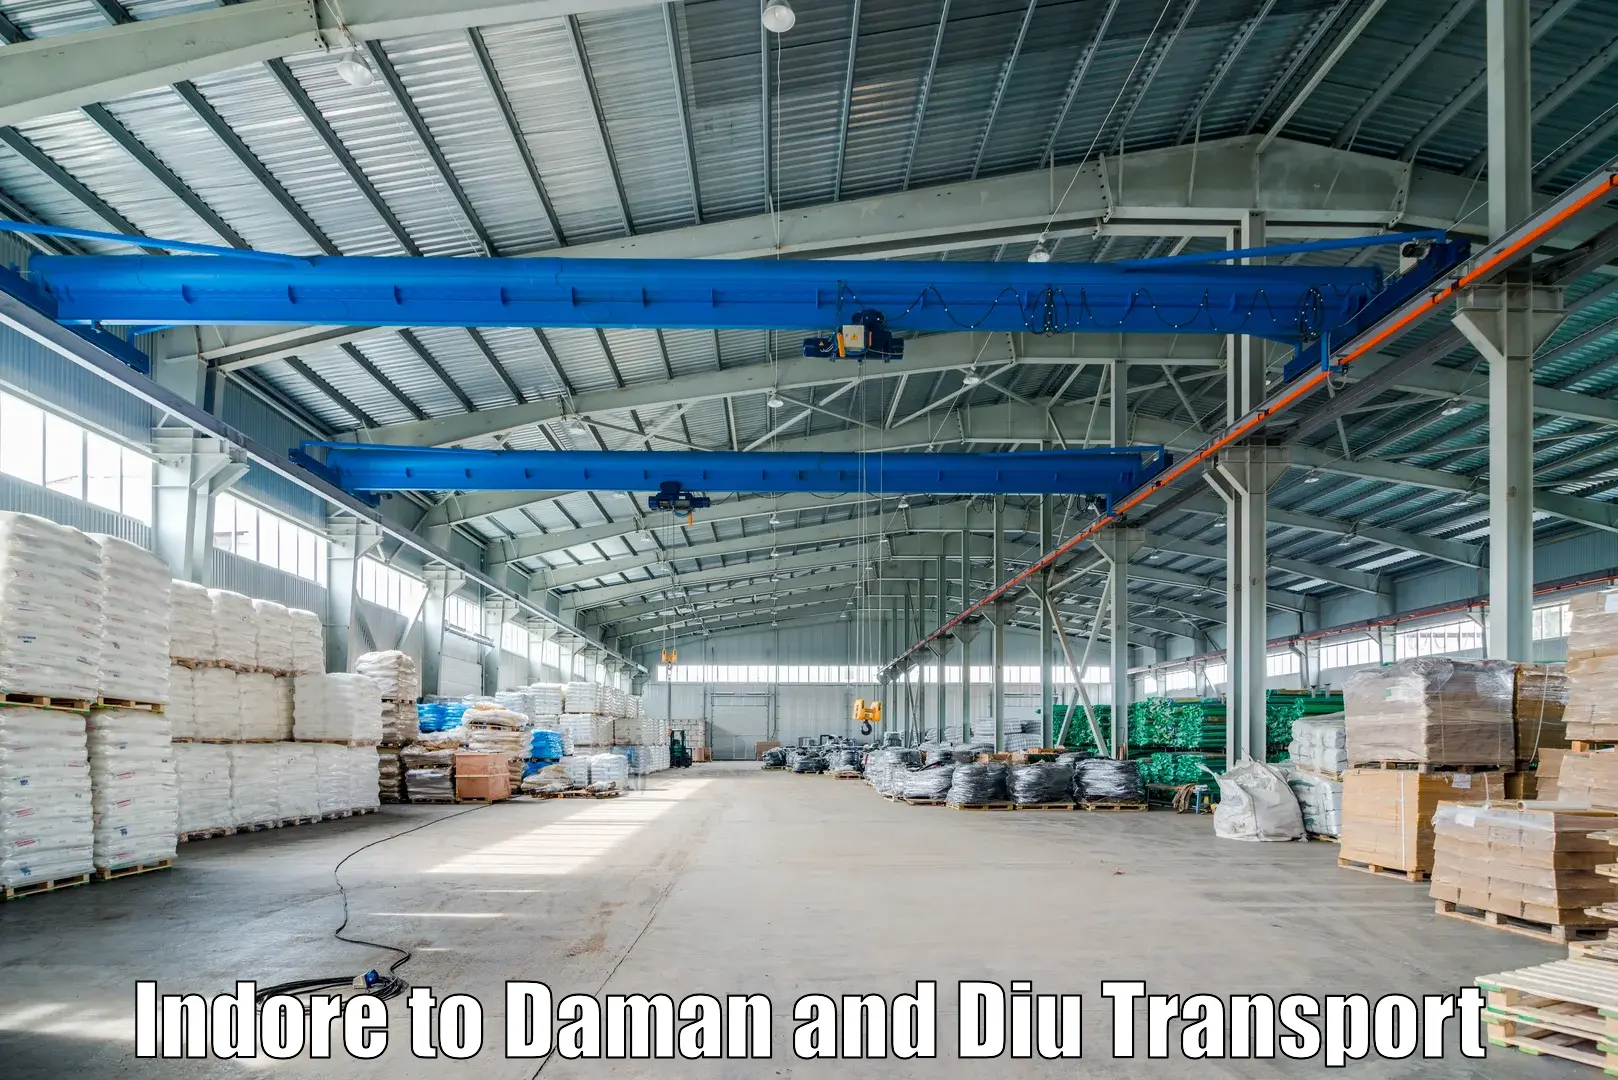 Daily parcel service transport Indore to Daman and Diu